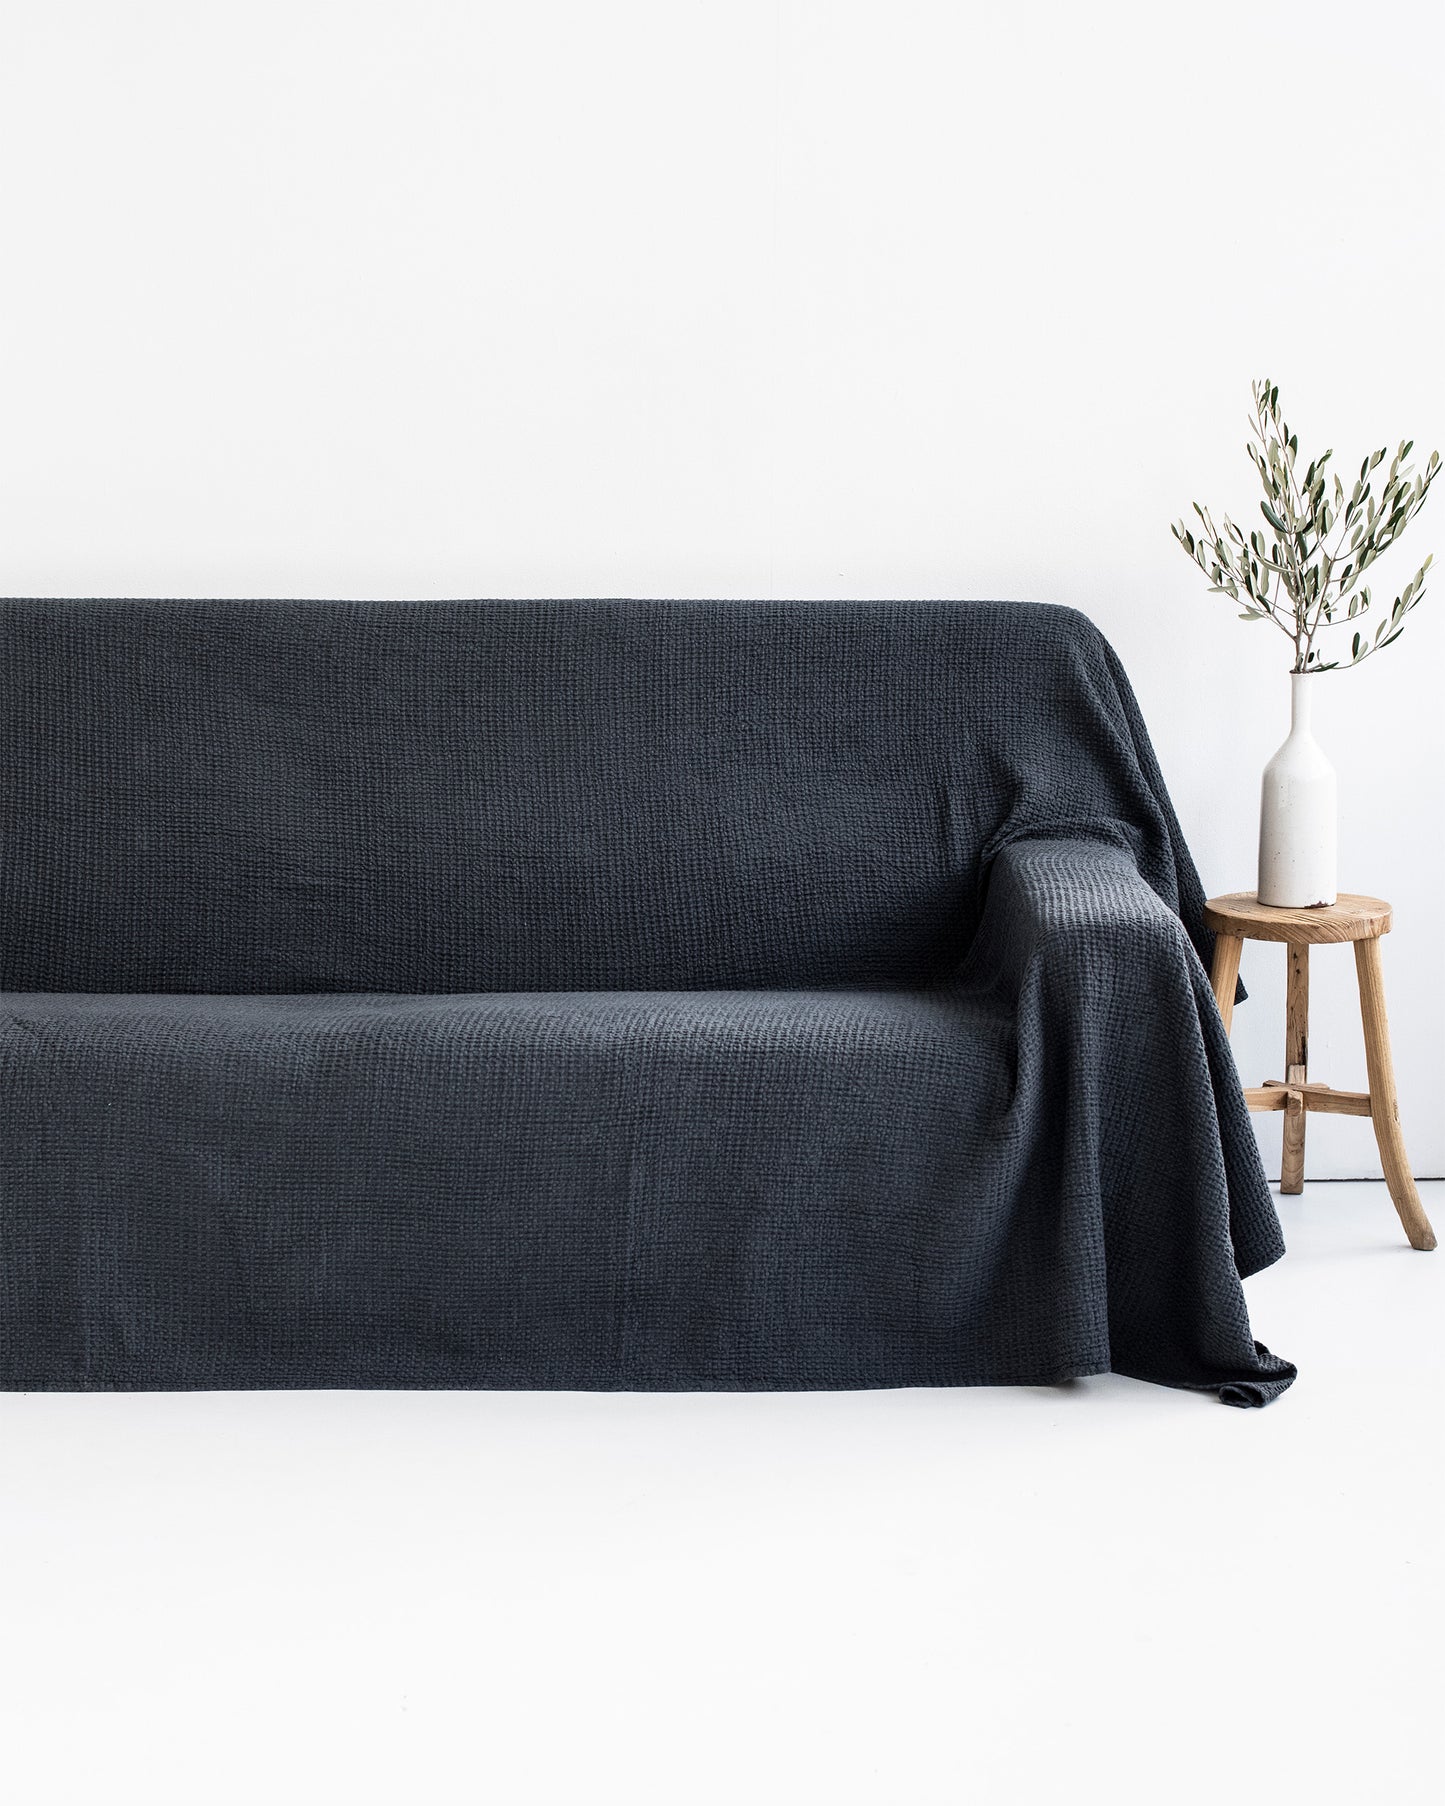 Waffle linen couch cover in Dark Gray - MagicLinen